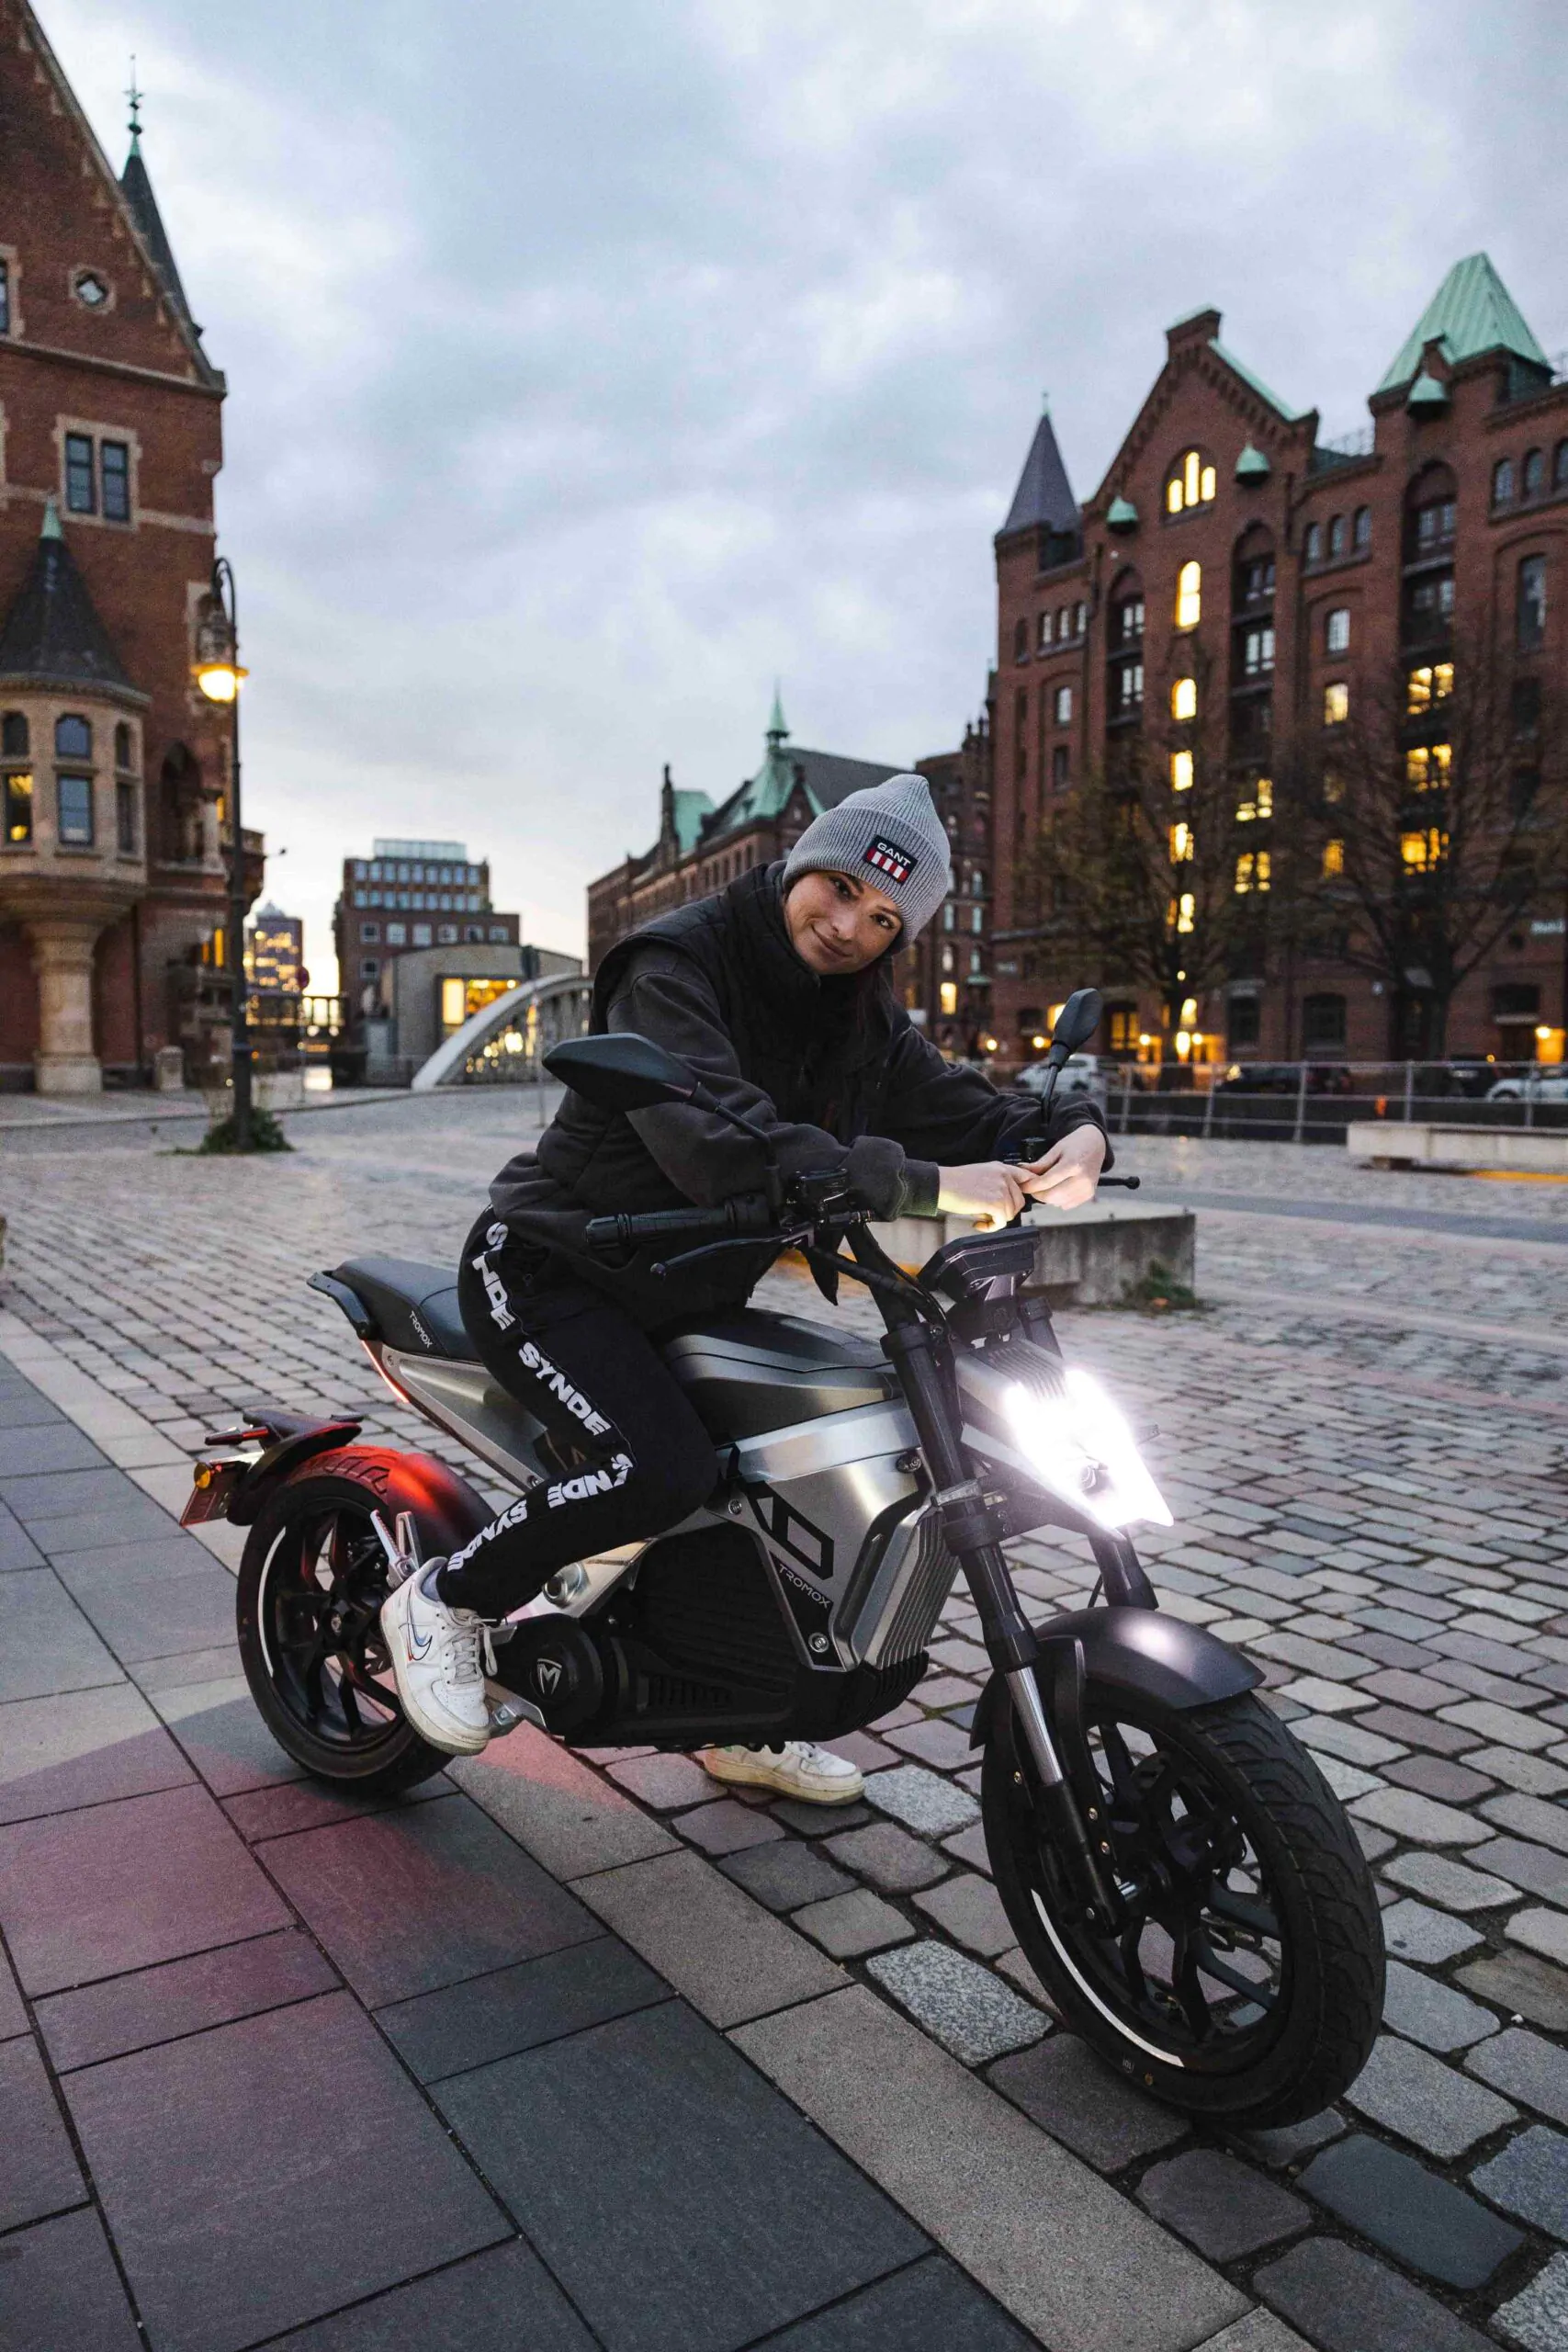 Why Electric Motorcycles are Not as Popular as Other E-Vehicles